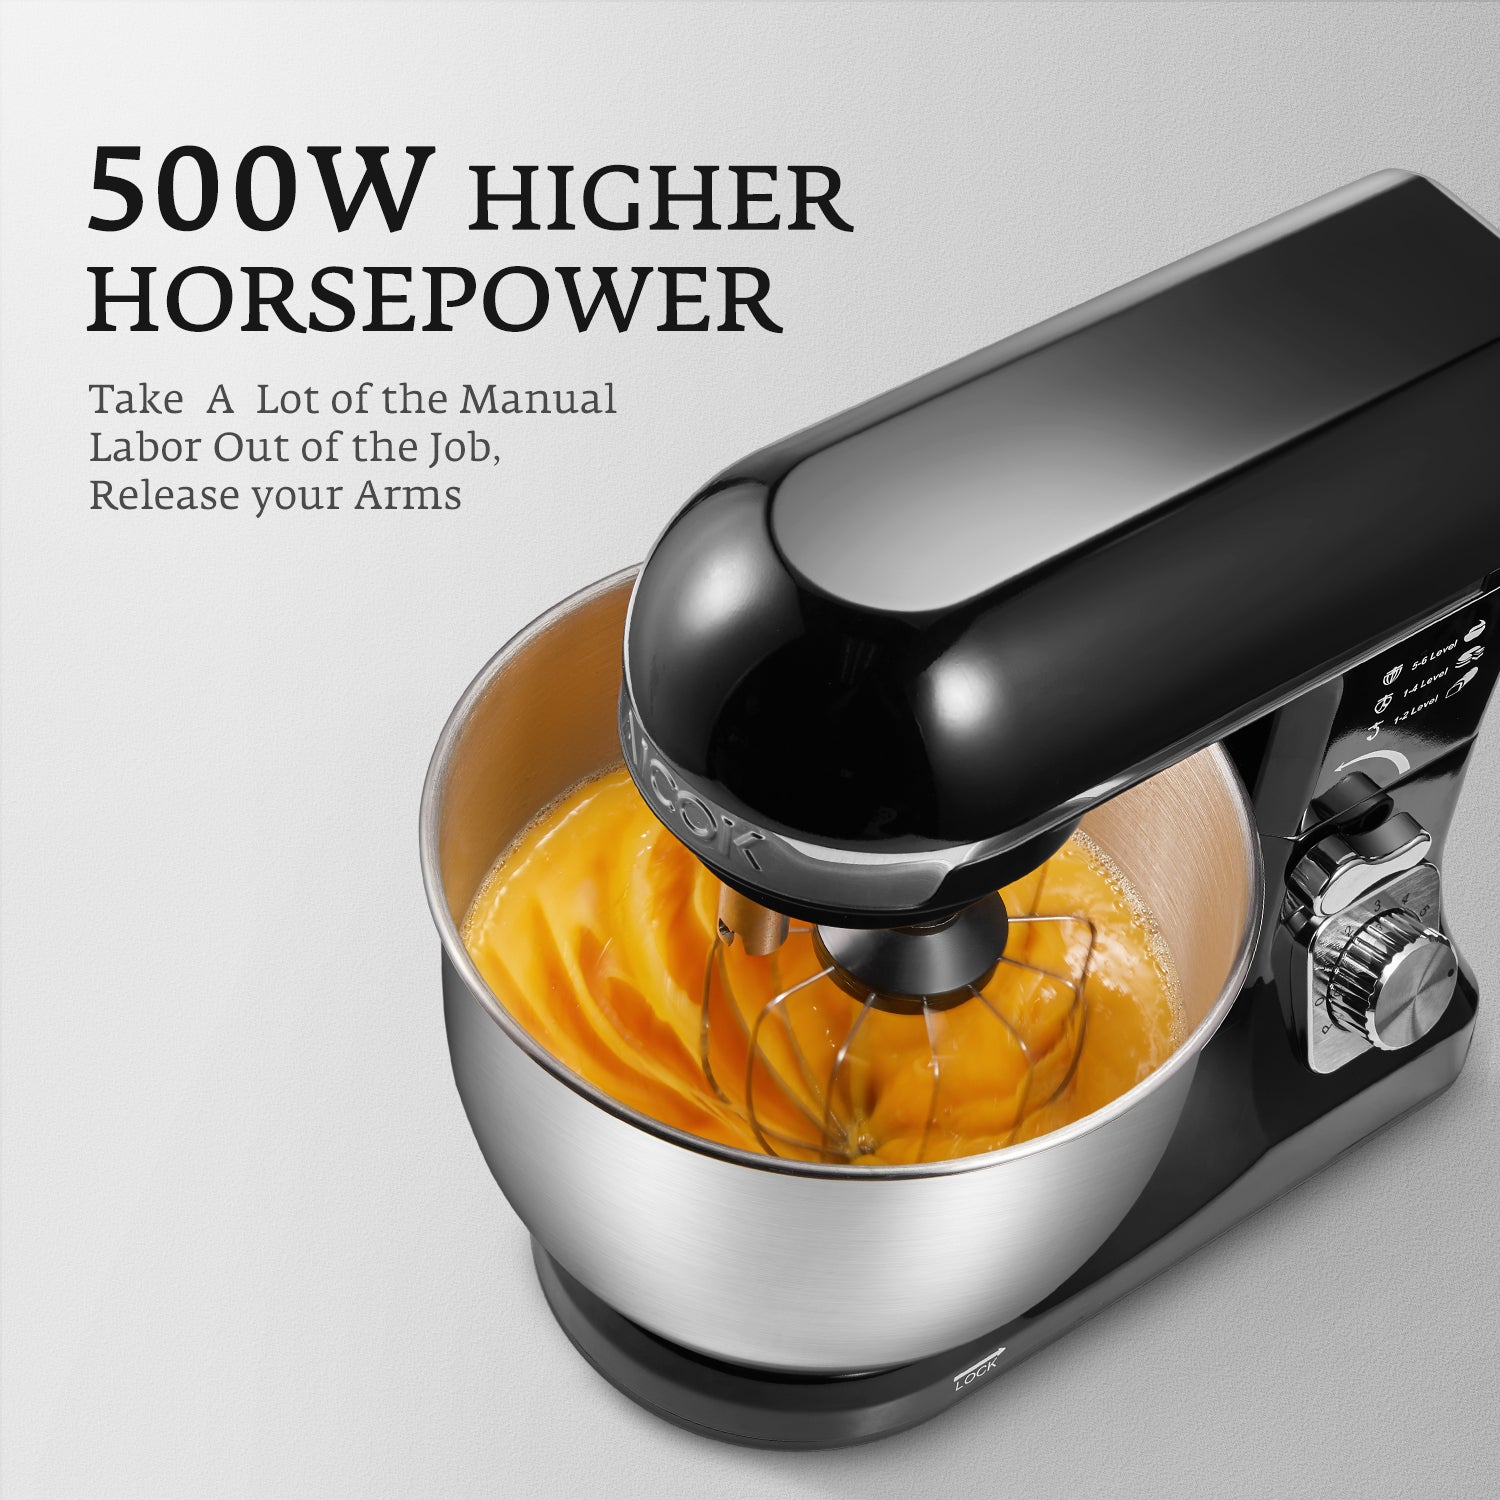 AICOK - Stand Mixer, Professional 5.5 QT Food Mixer MK37, powerful motor, compact, easy stock mixer, easy use and cllean